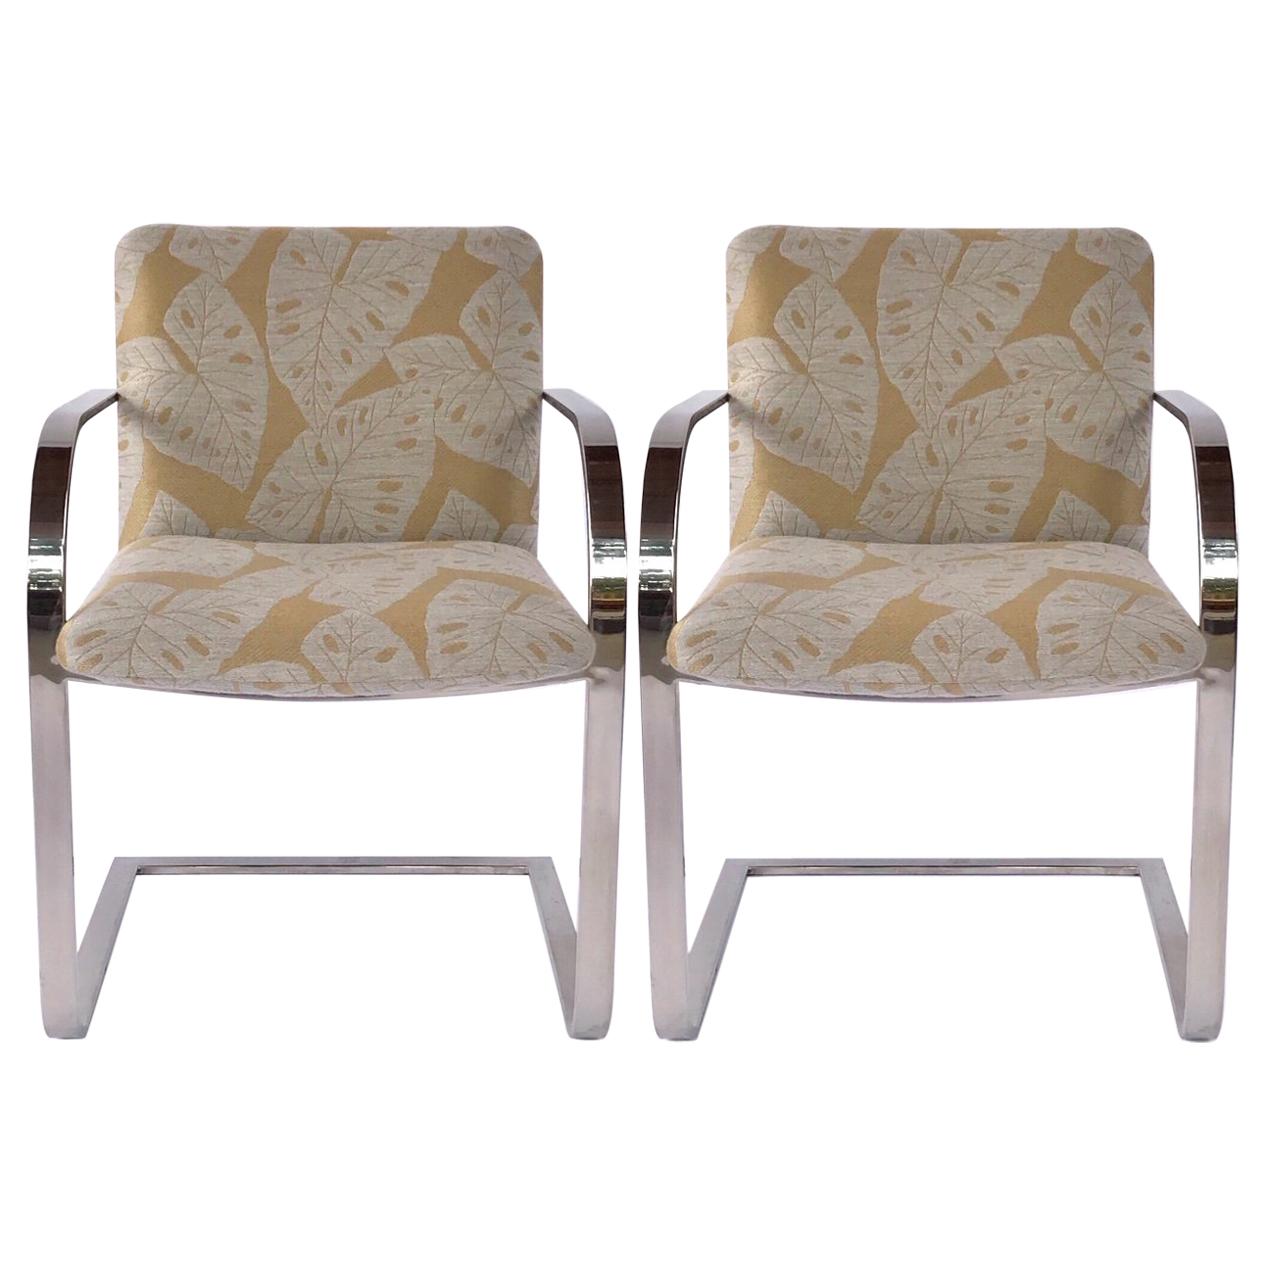 Pair of Mid-Century Modern Chrome Desk Chairs with Tropical Print by Brueton